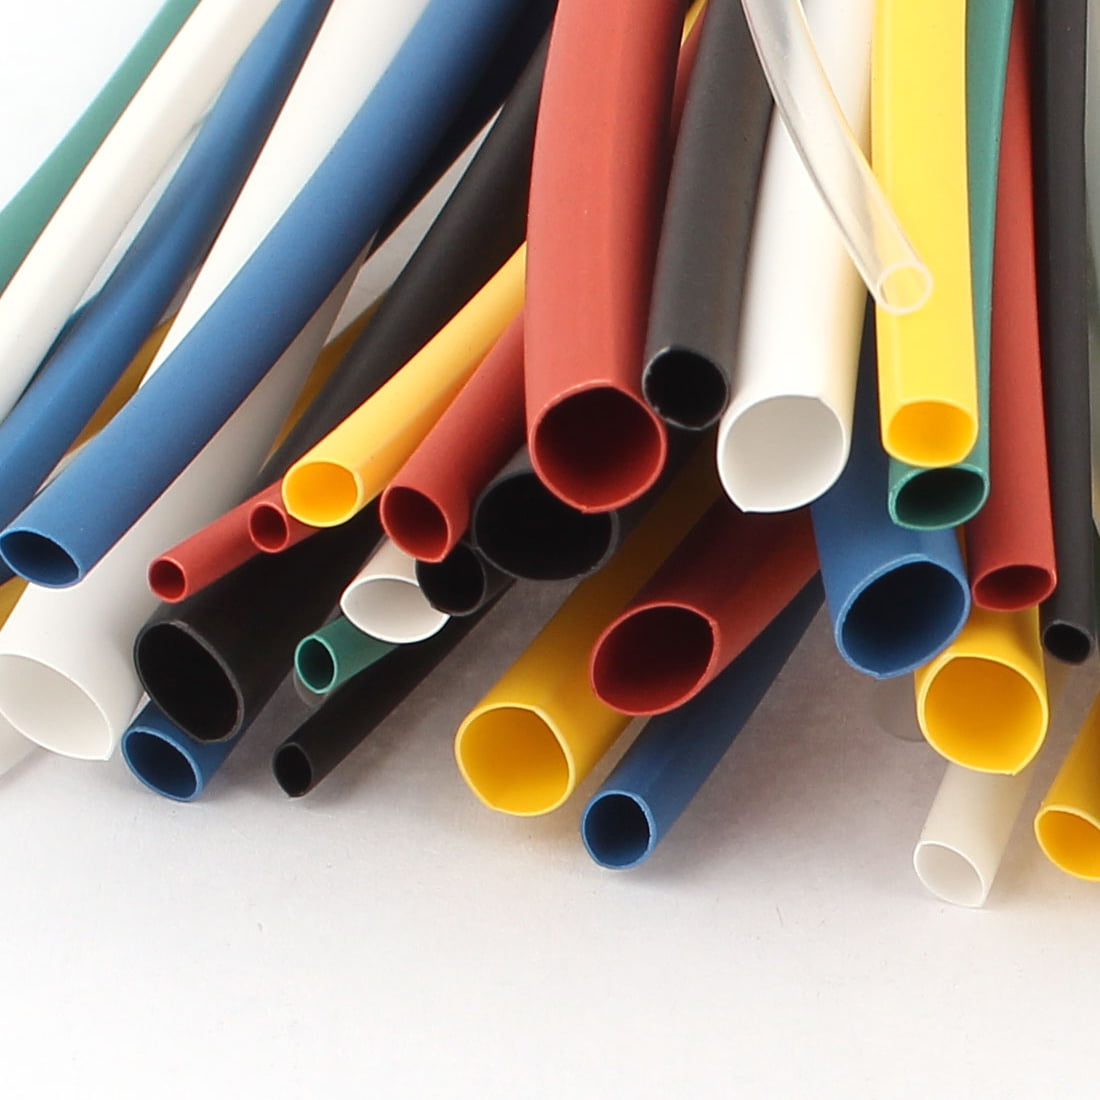 35x 7 Colors 5mm Assorted 2 1 Heat Shrink Tubing Sleeving Wrap Cable 65mm Ca for sale online 